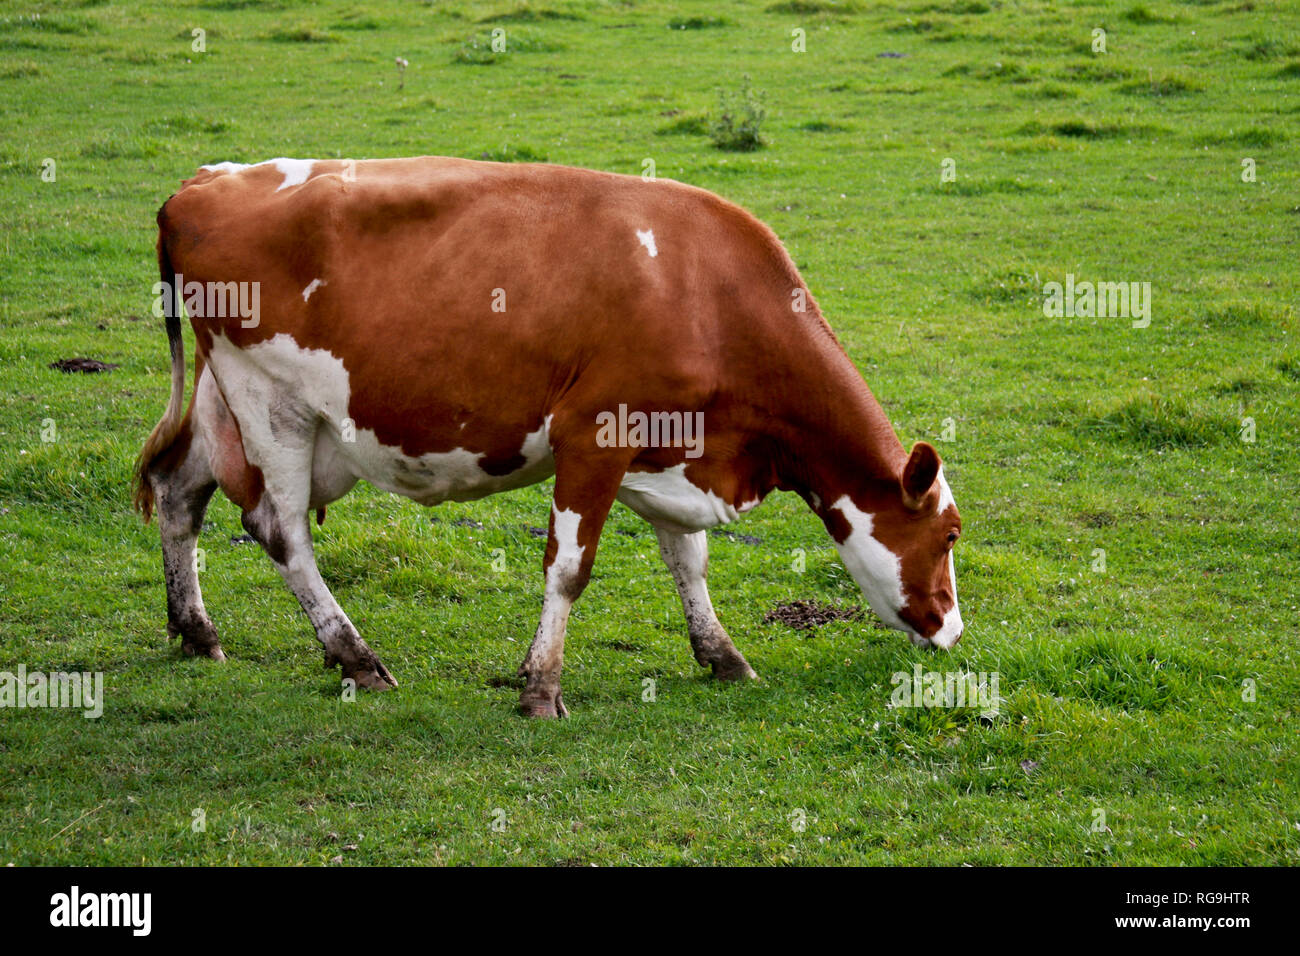 Guernsey dairy cow grazing on a field Wisconsin, u.s.a. Stock Photo